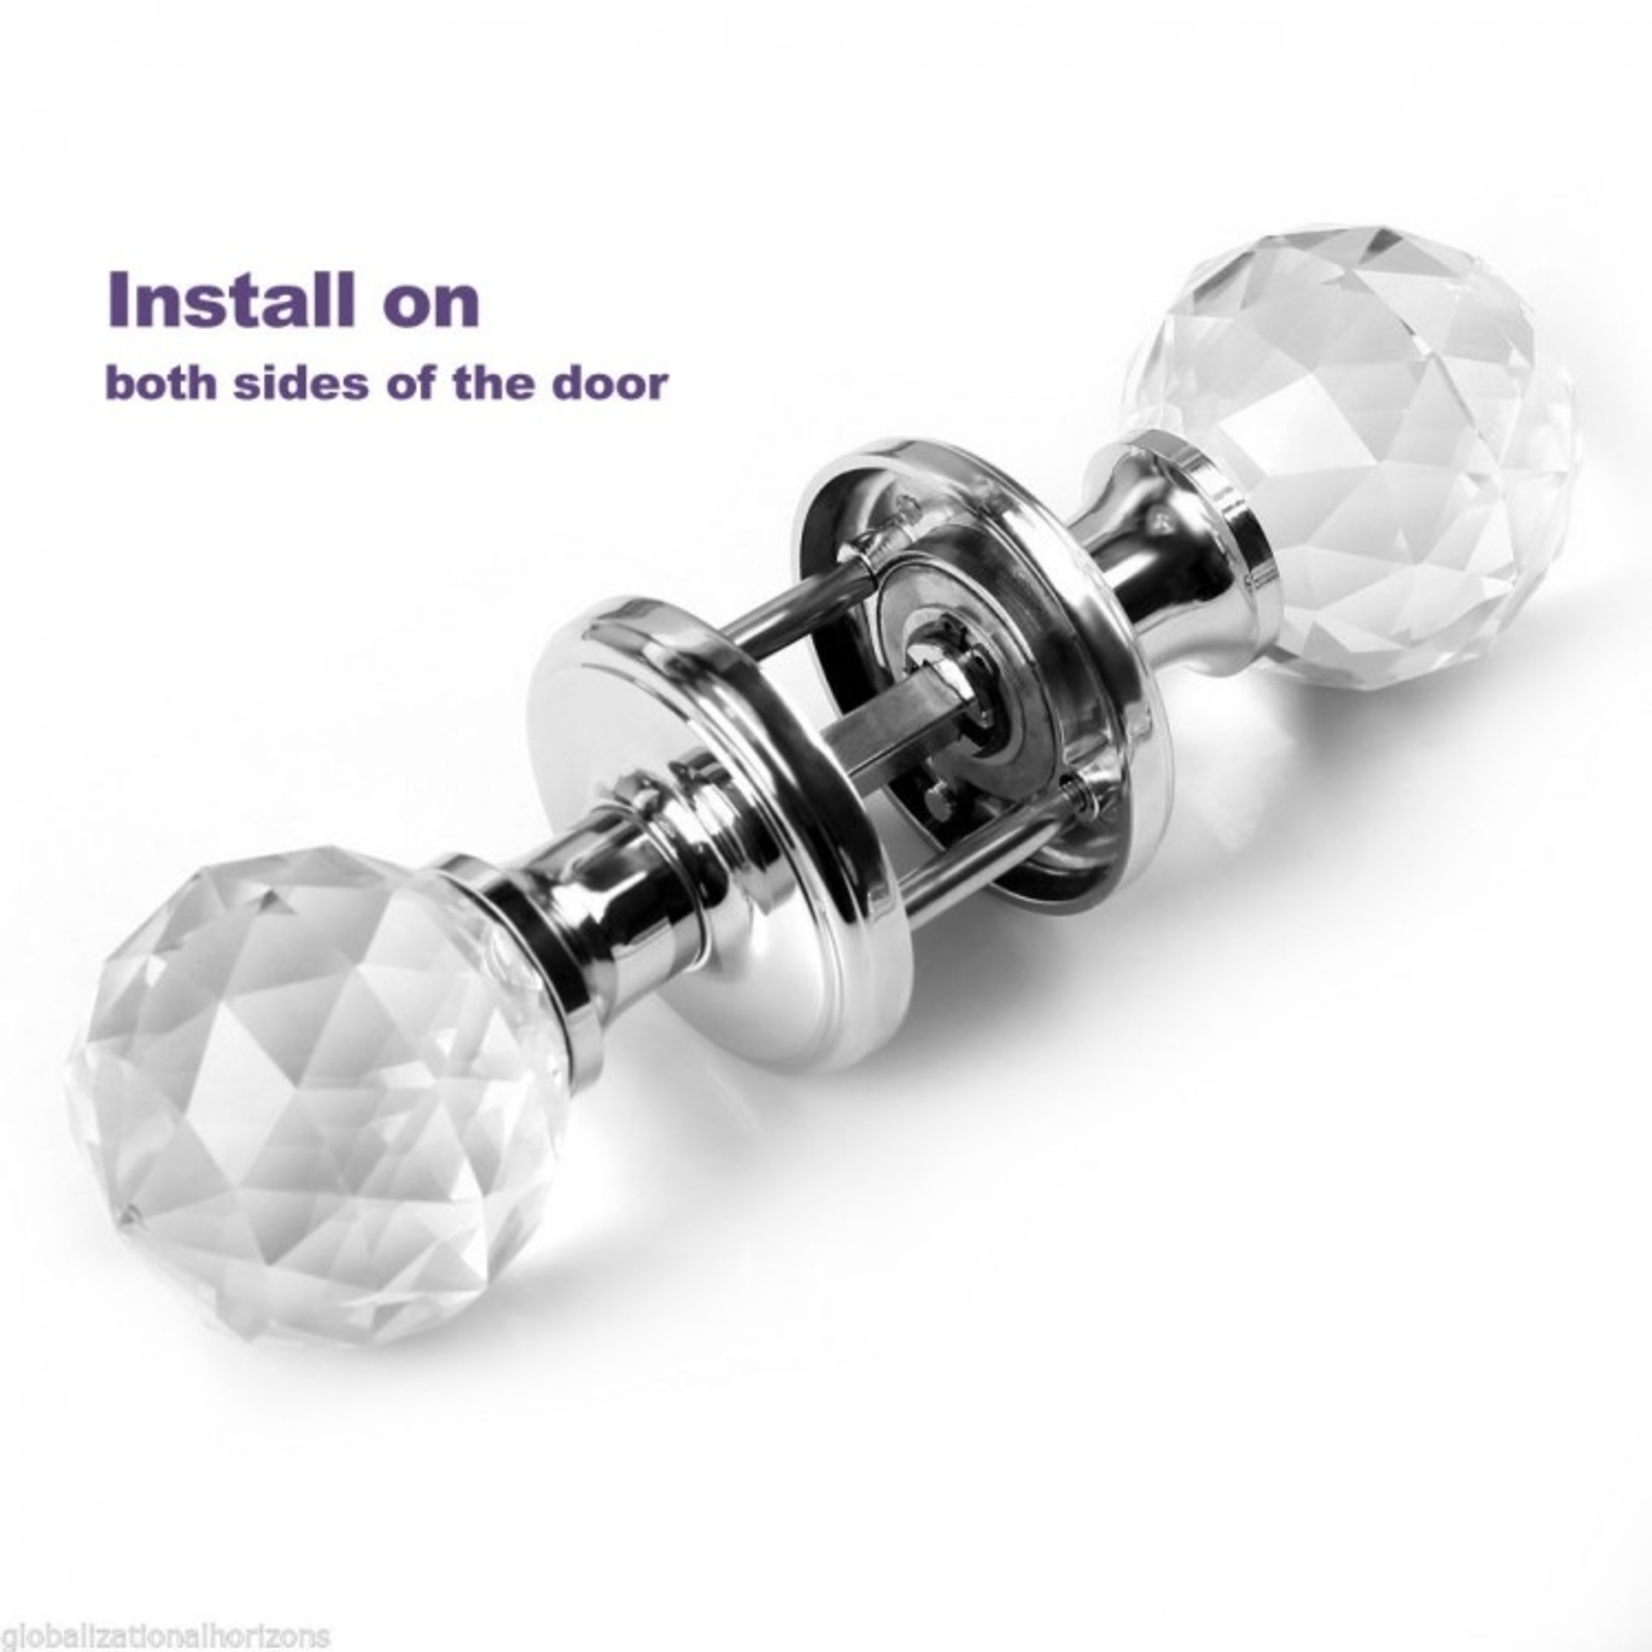 PKA Chrome Faceted Crystal (Pair) Mortice Door Knobs